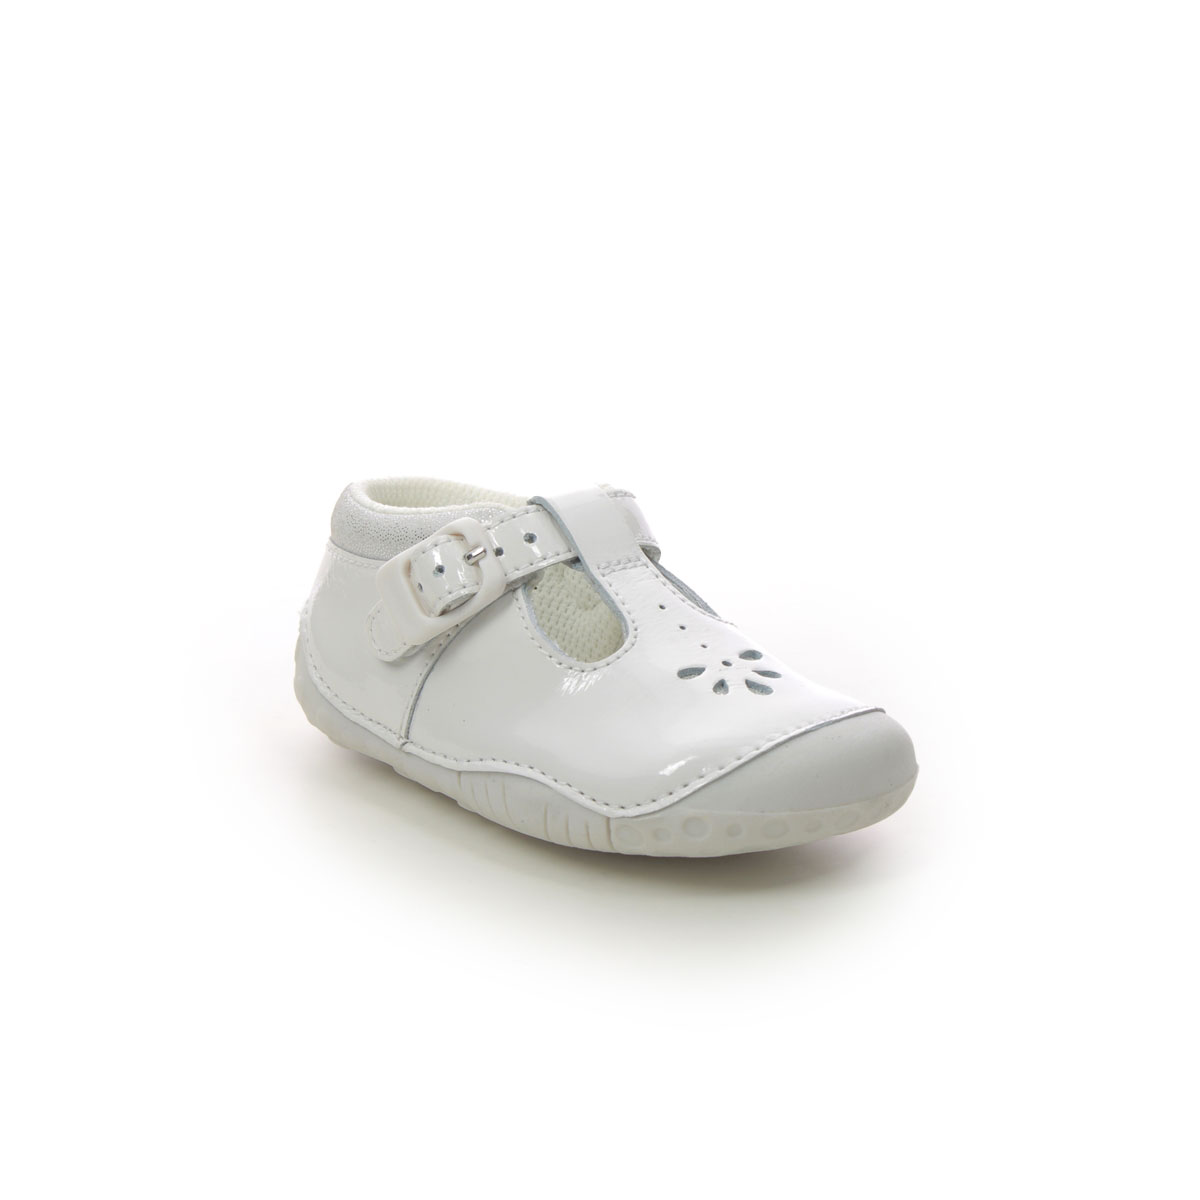 Start Rite - Baby Bubble In White Patent 0773-14G In Size 2 In Plain White Patent First And Baby Shoes  In White Patent For kids